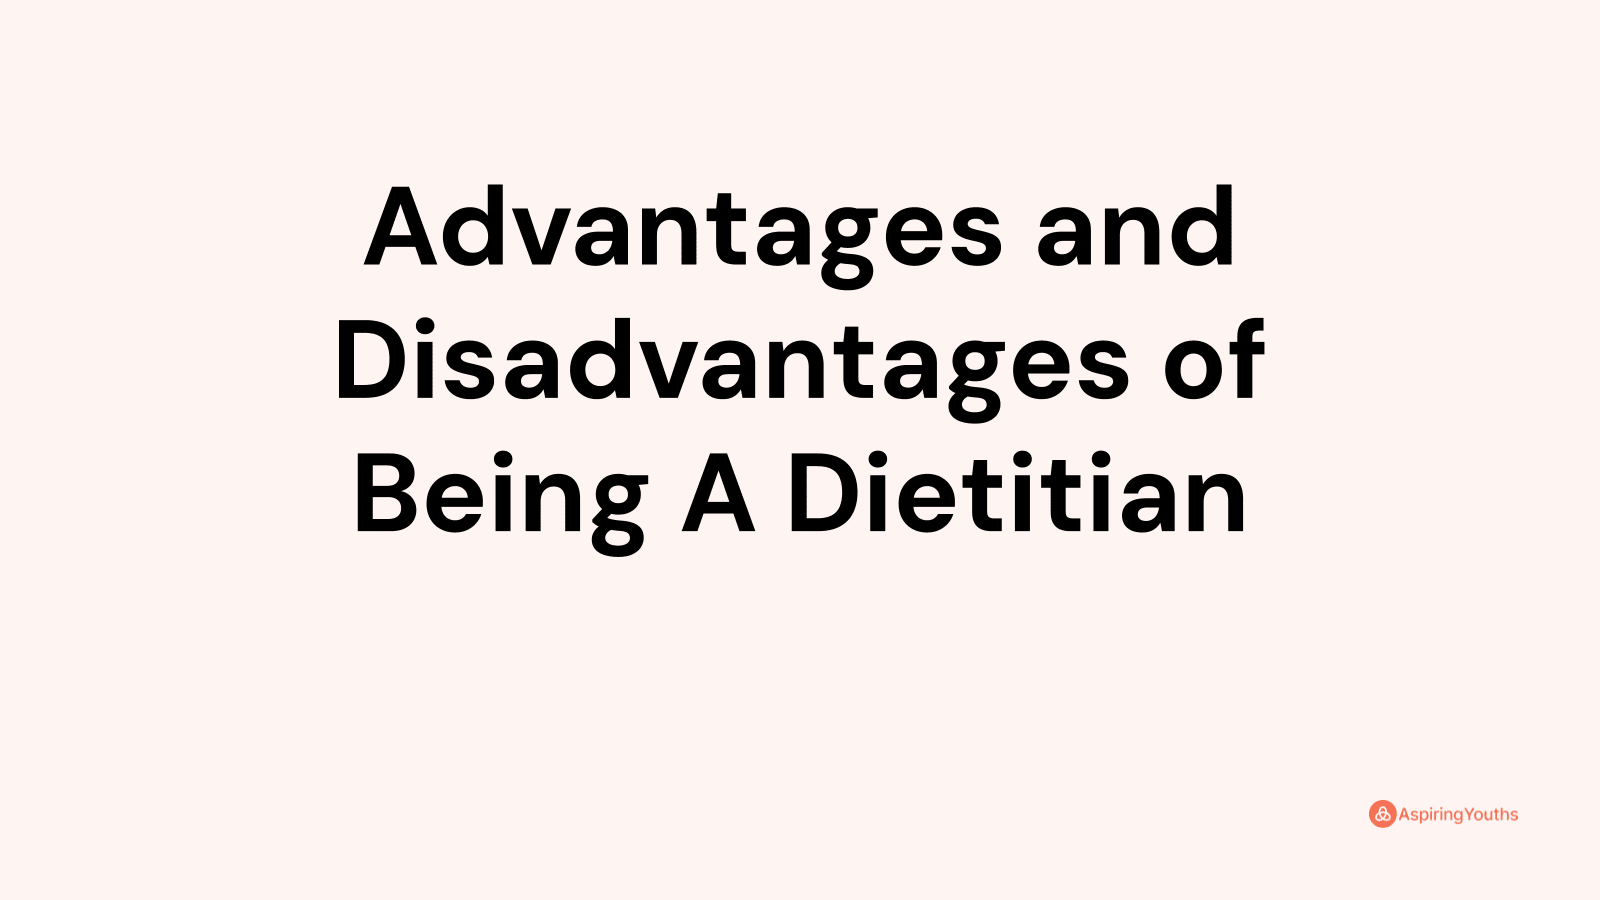 Advantages and disadvantages of Being A Dietitian